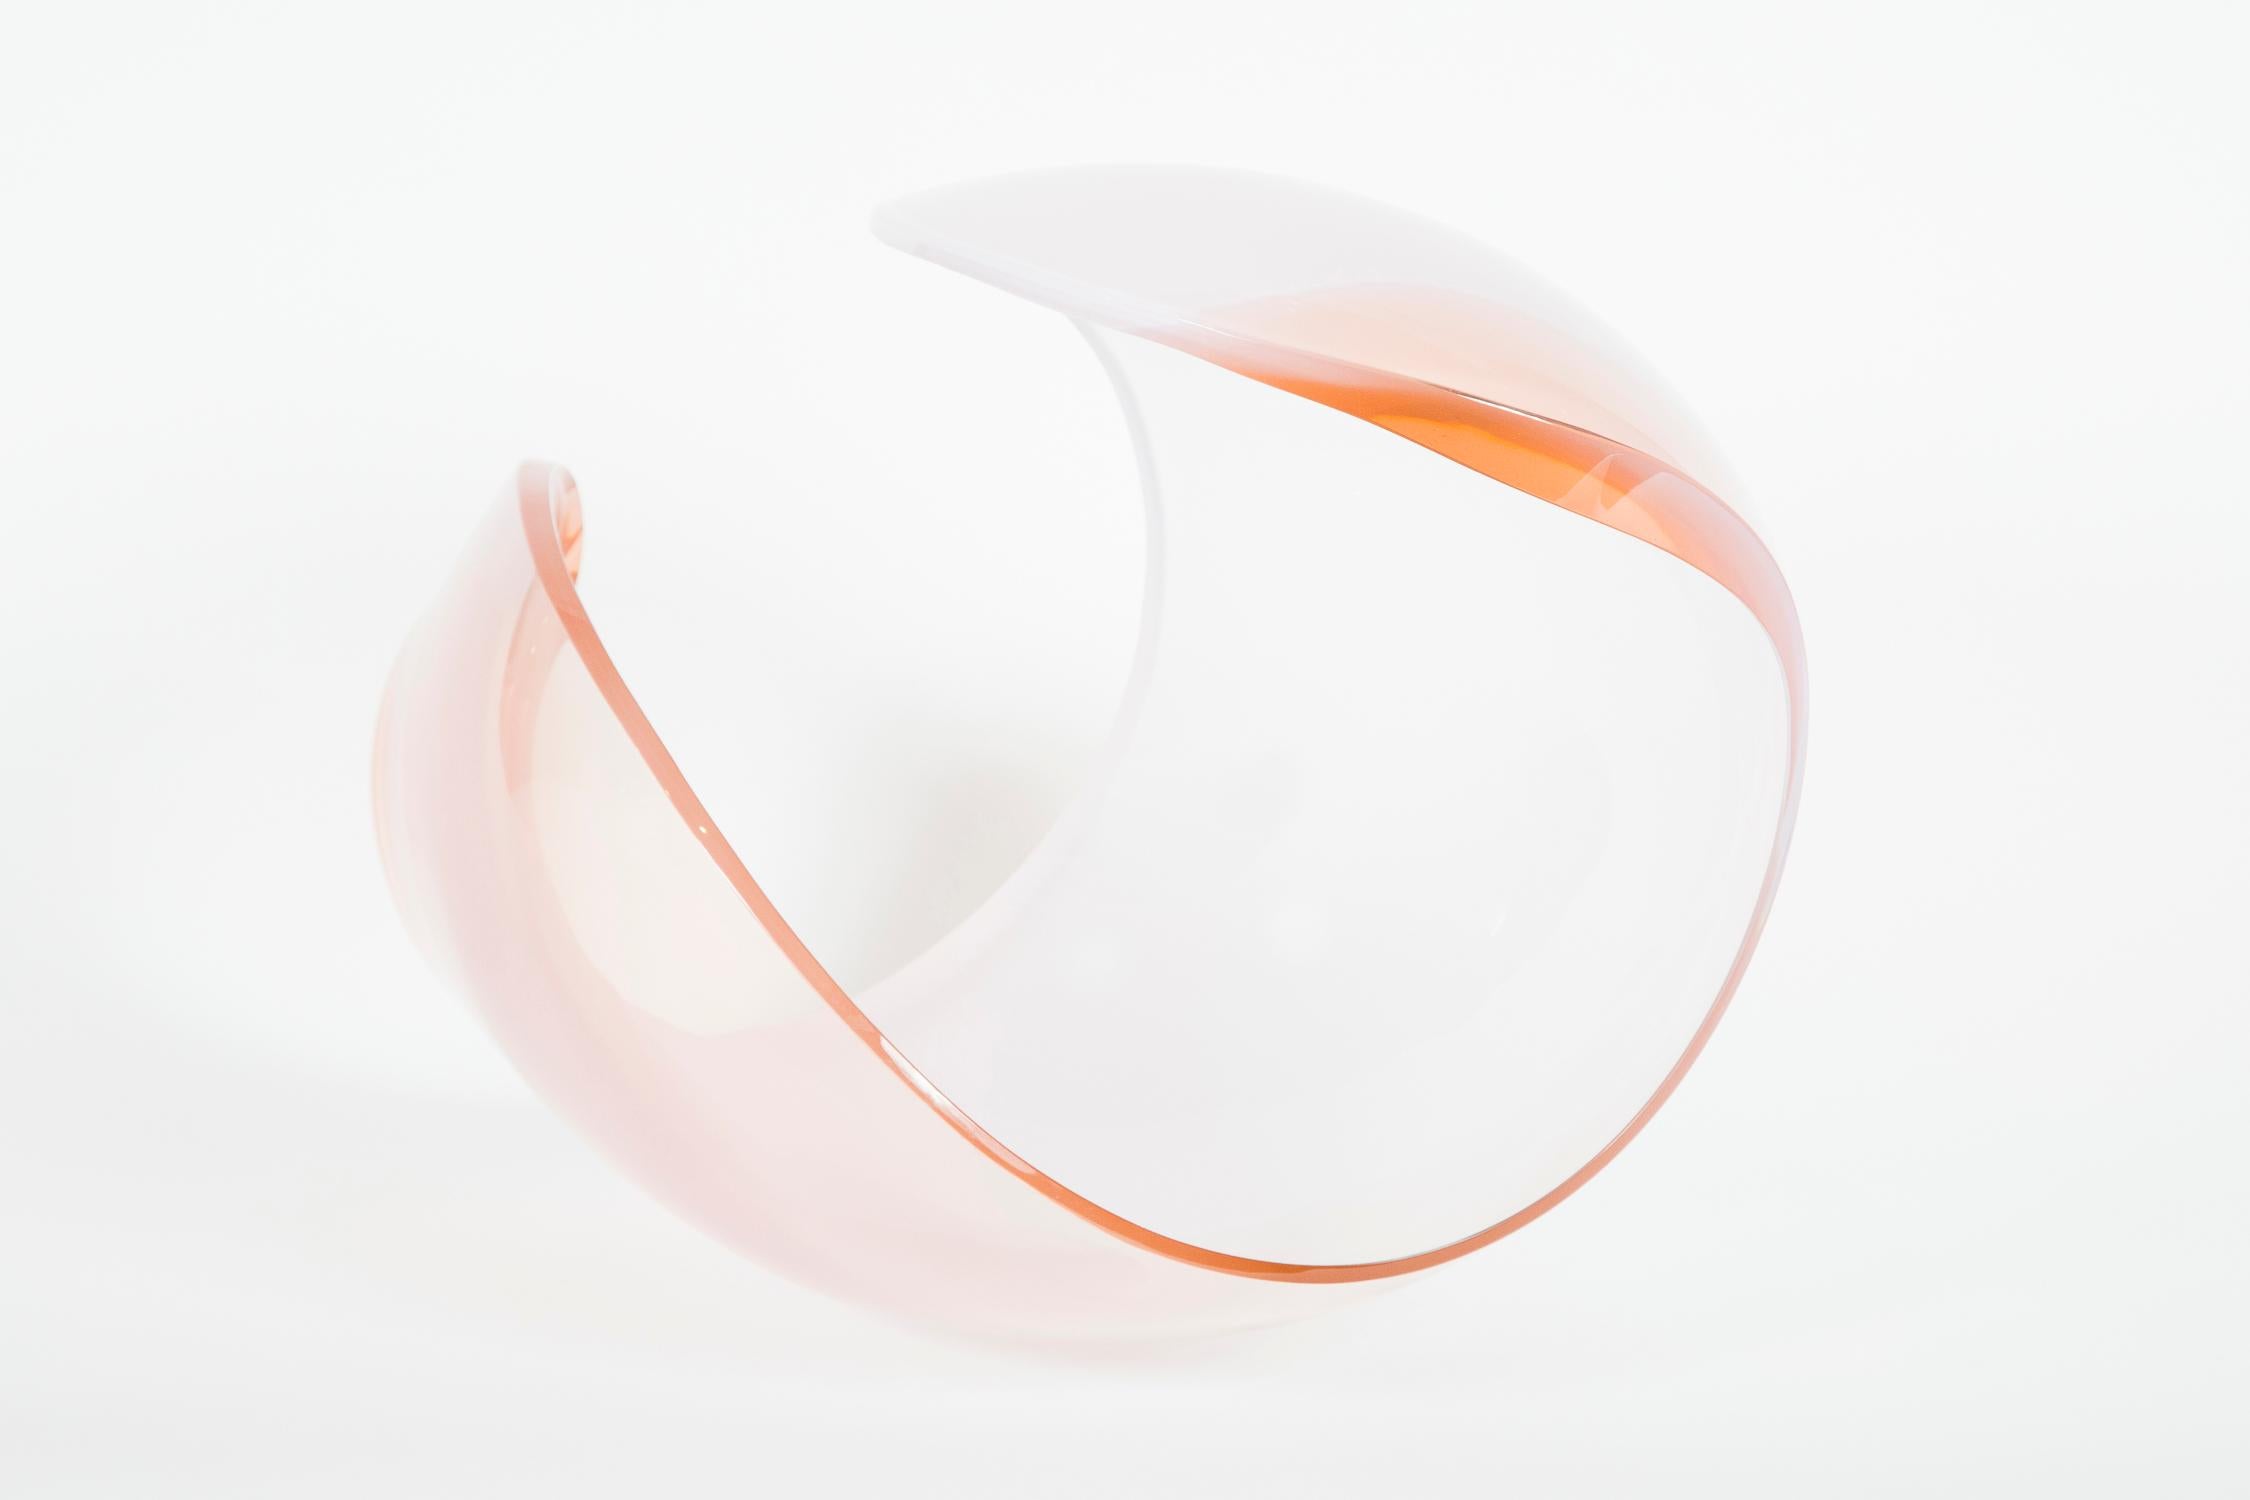 Art Glass Planet in White & Apricot glass sculpture and centrepiece by Lena Bergstrom